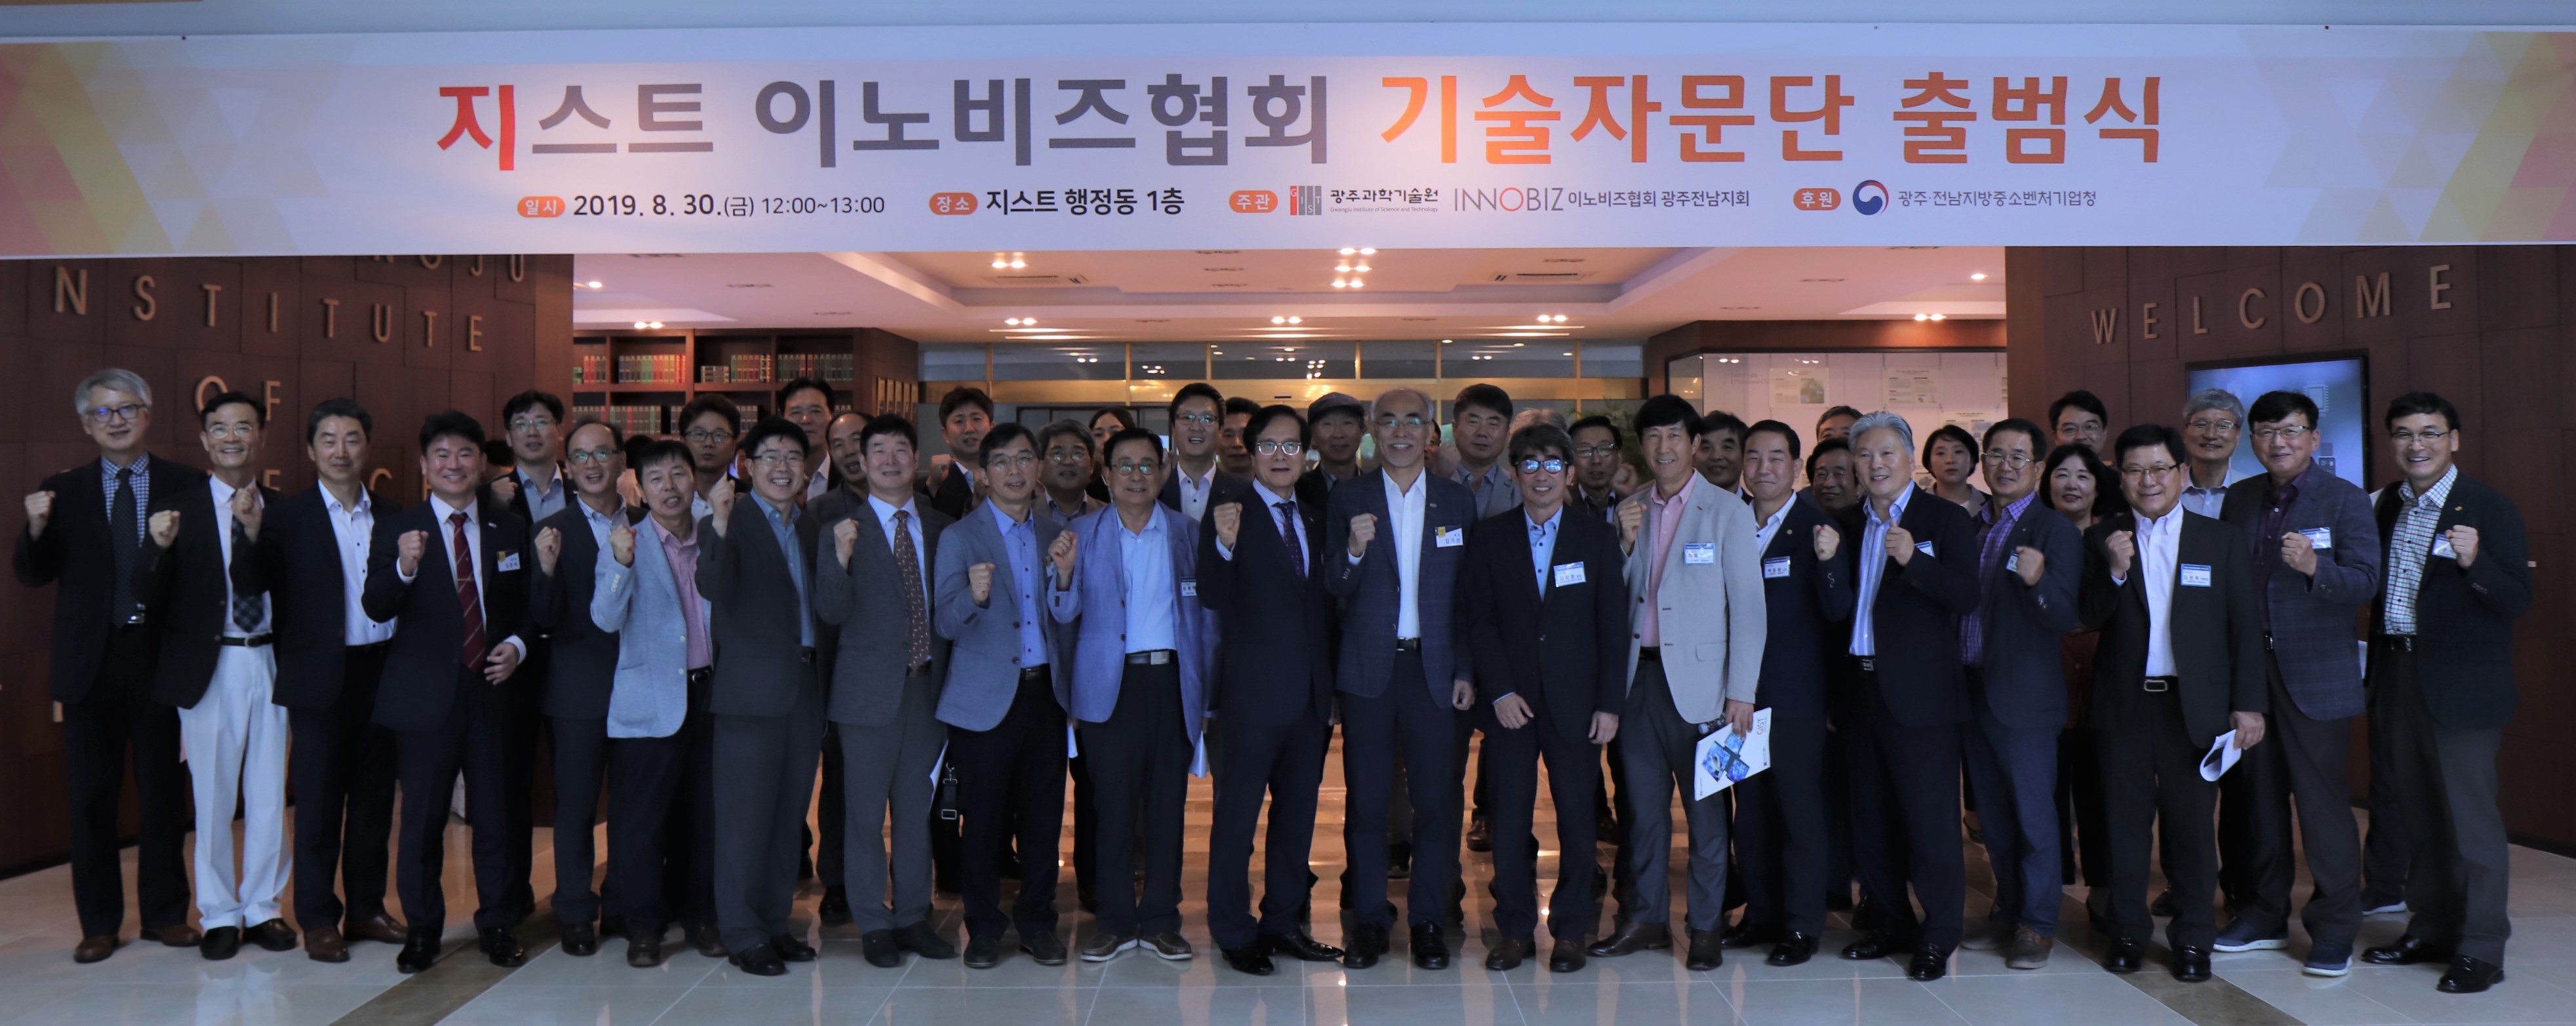 GIST launches a technical advisory committee for materials, parts, and equipment to support the INNOBIZ Association and local companies 이미지